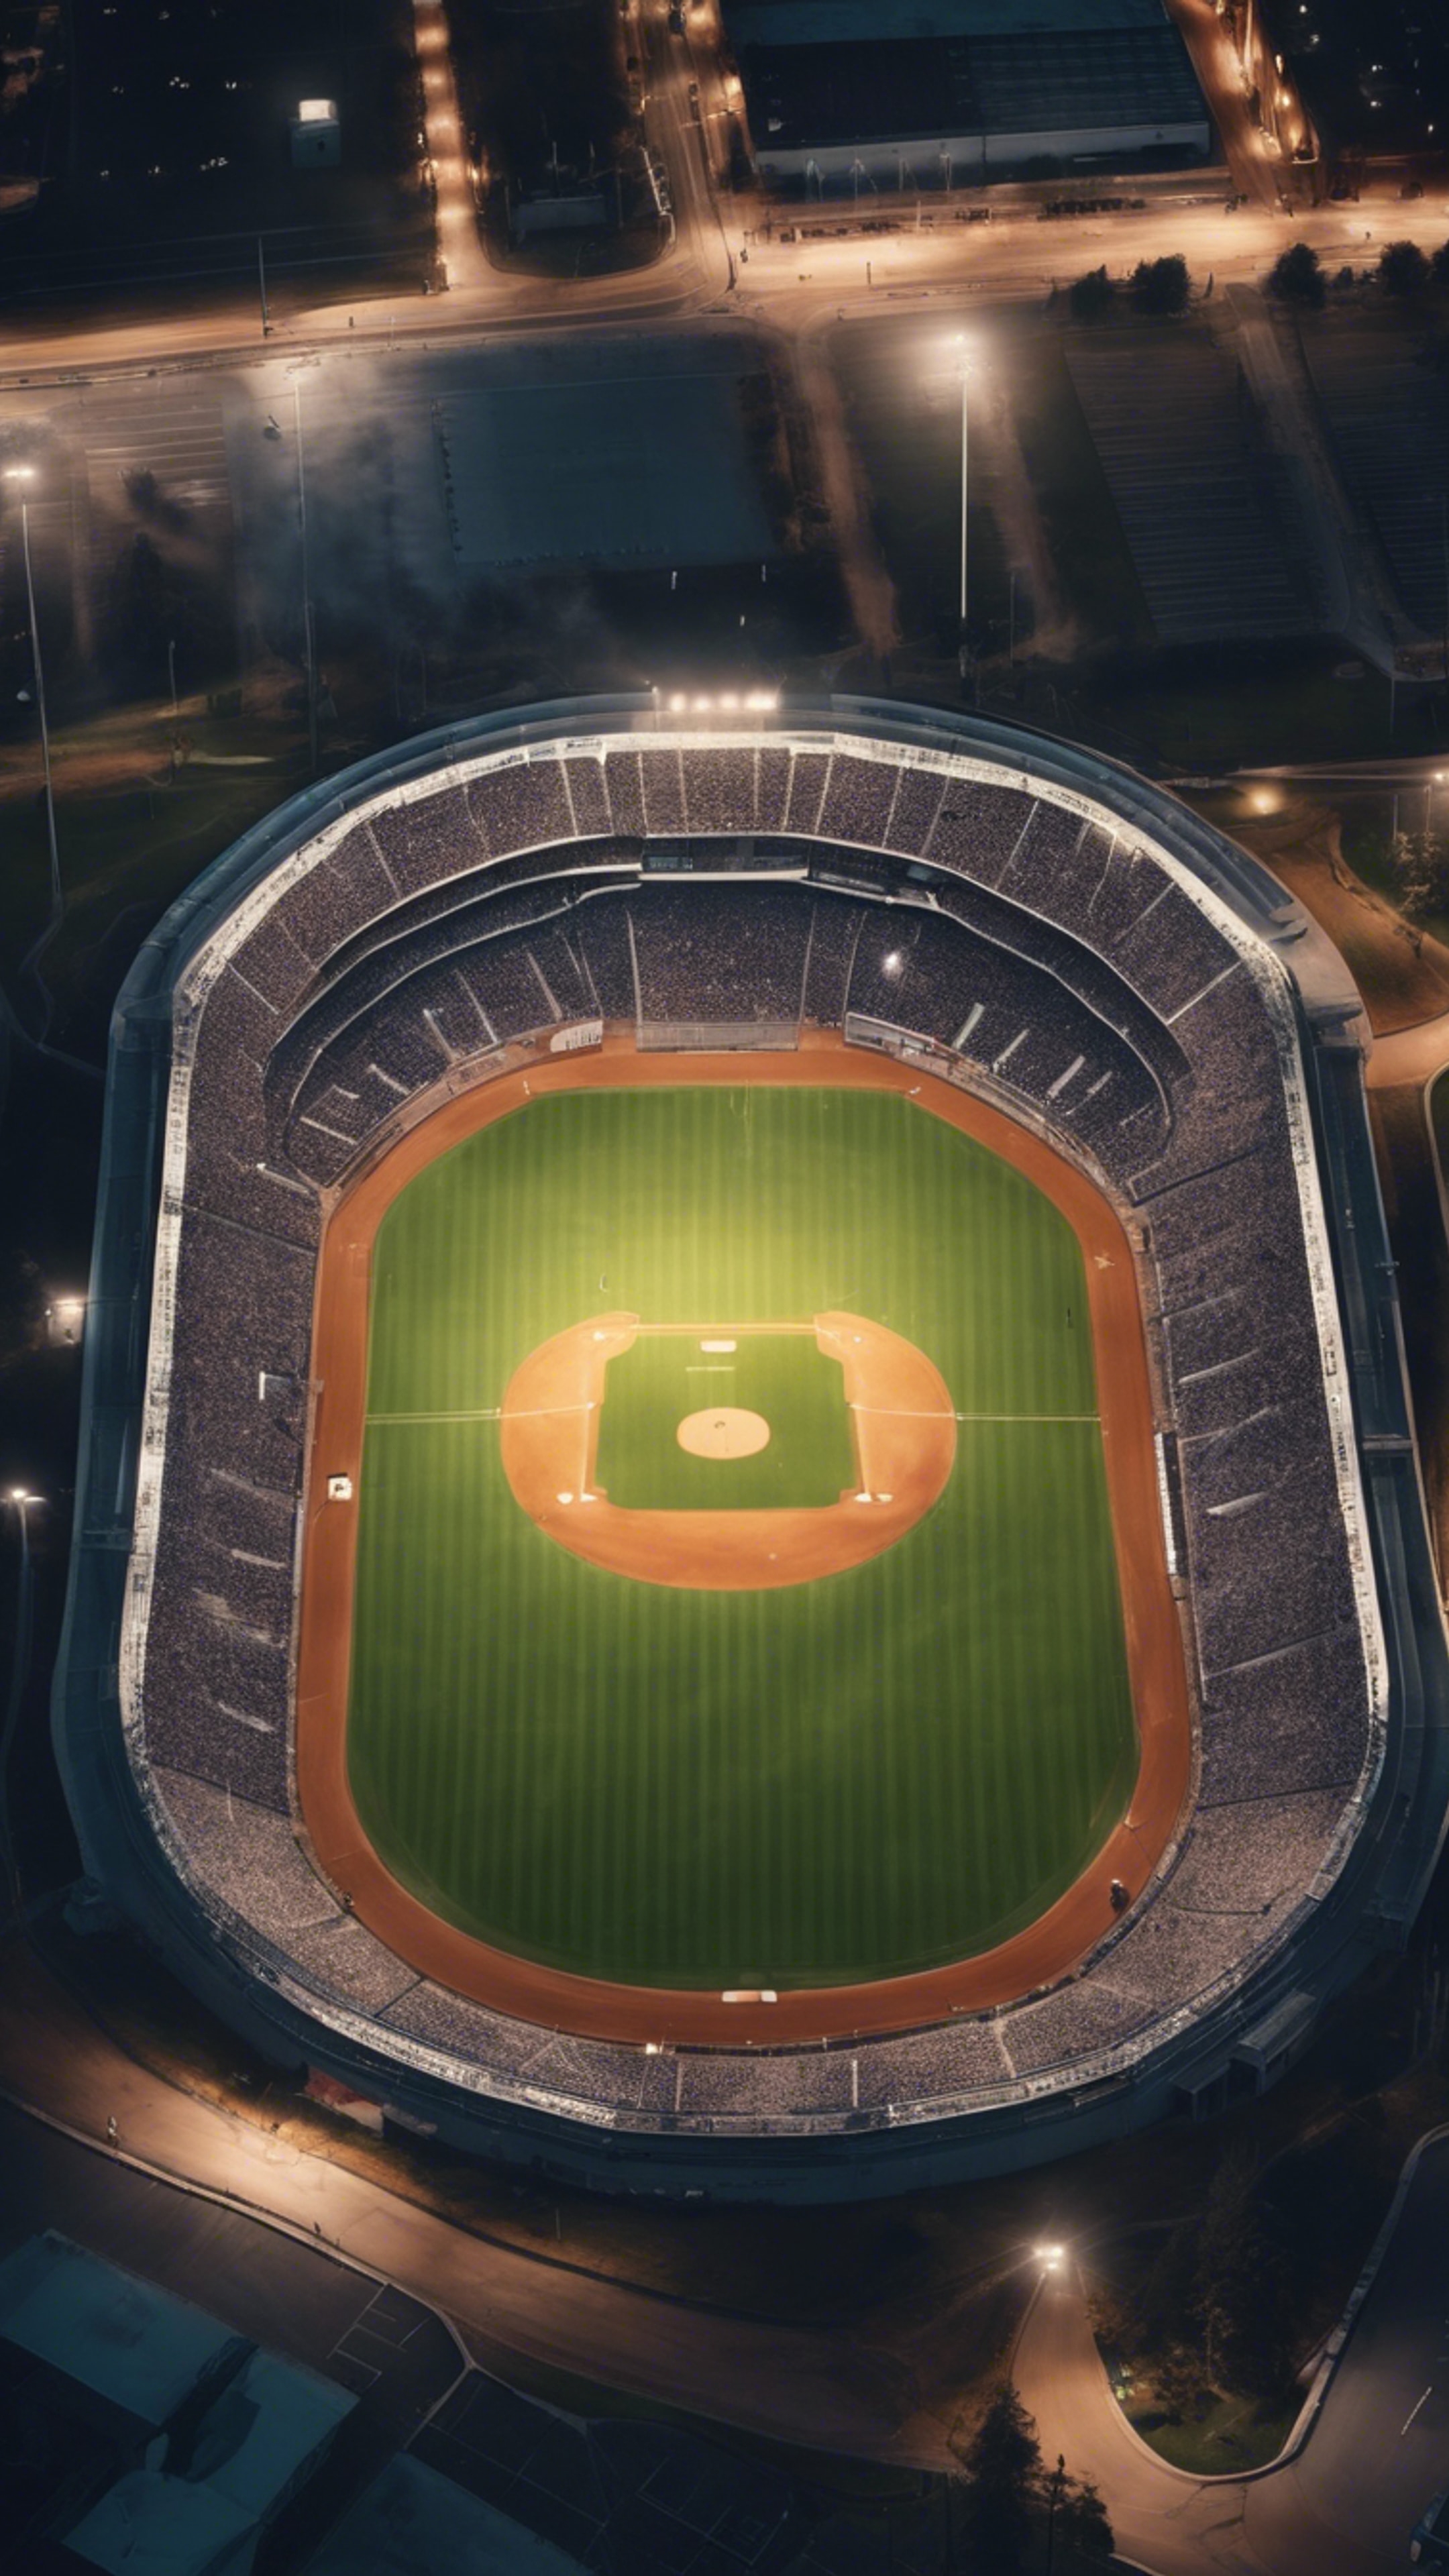 Aerial view of an empty baseball field highlighted by stadium lights in a clear night. Hình nền[11420cd4e6014be4a648]